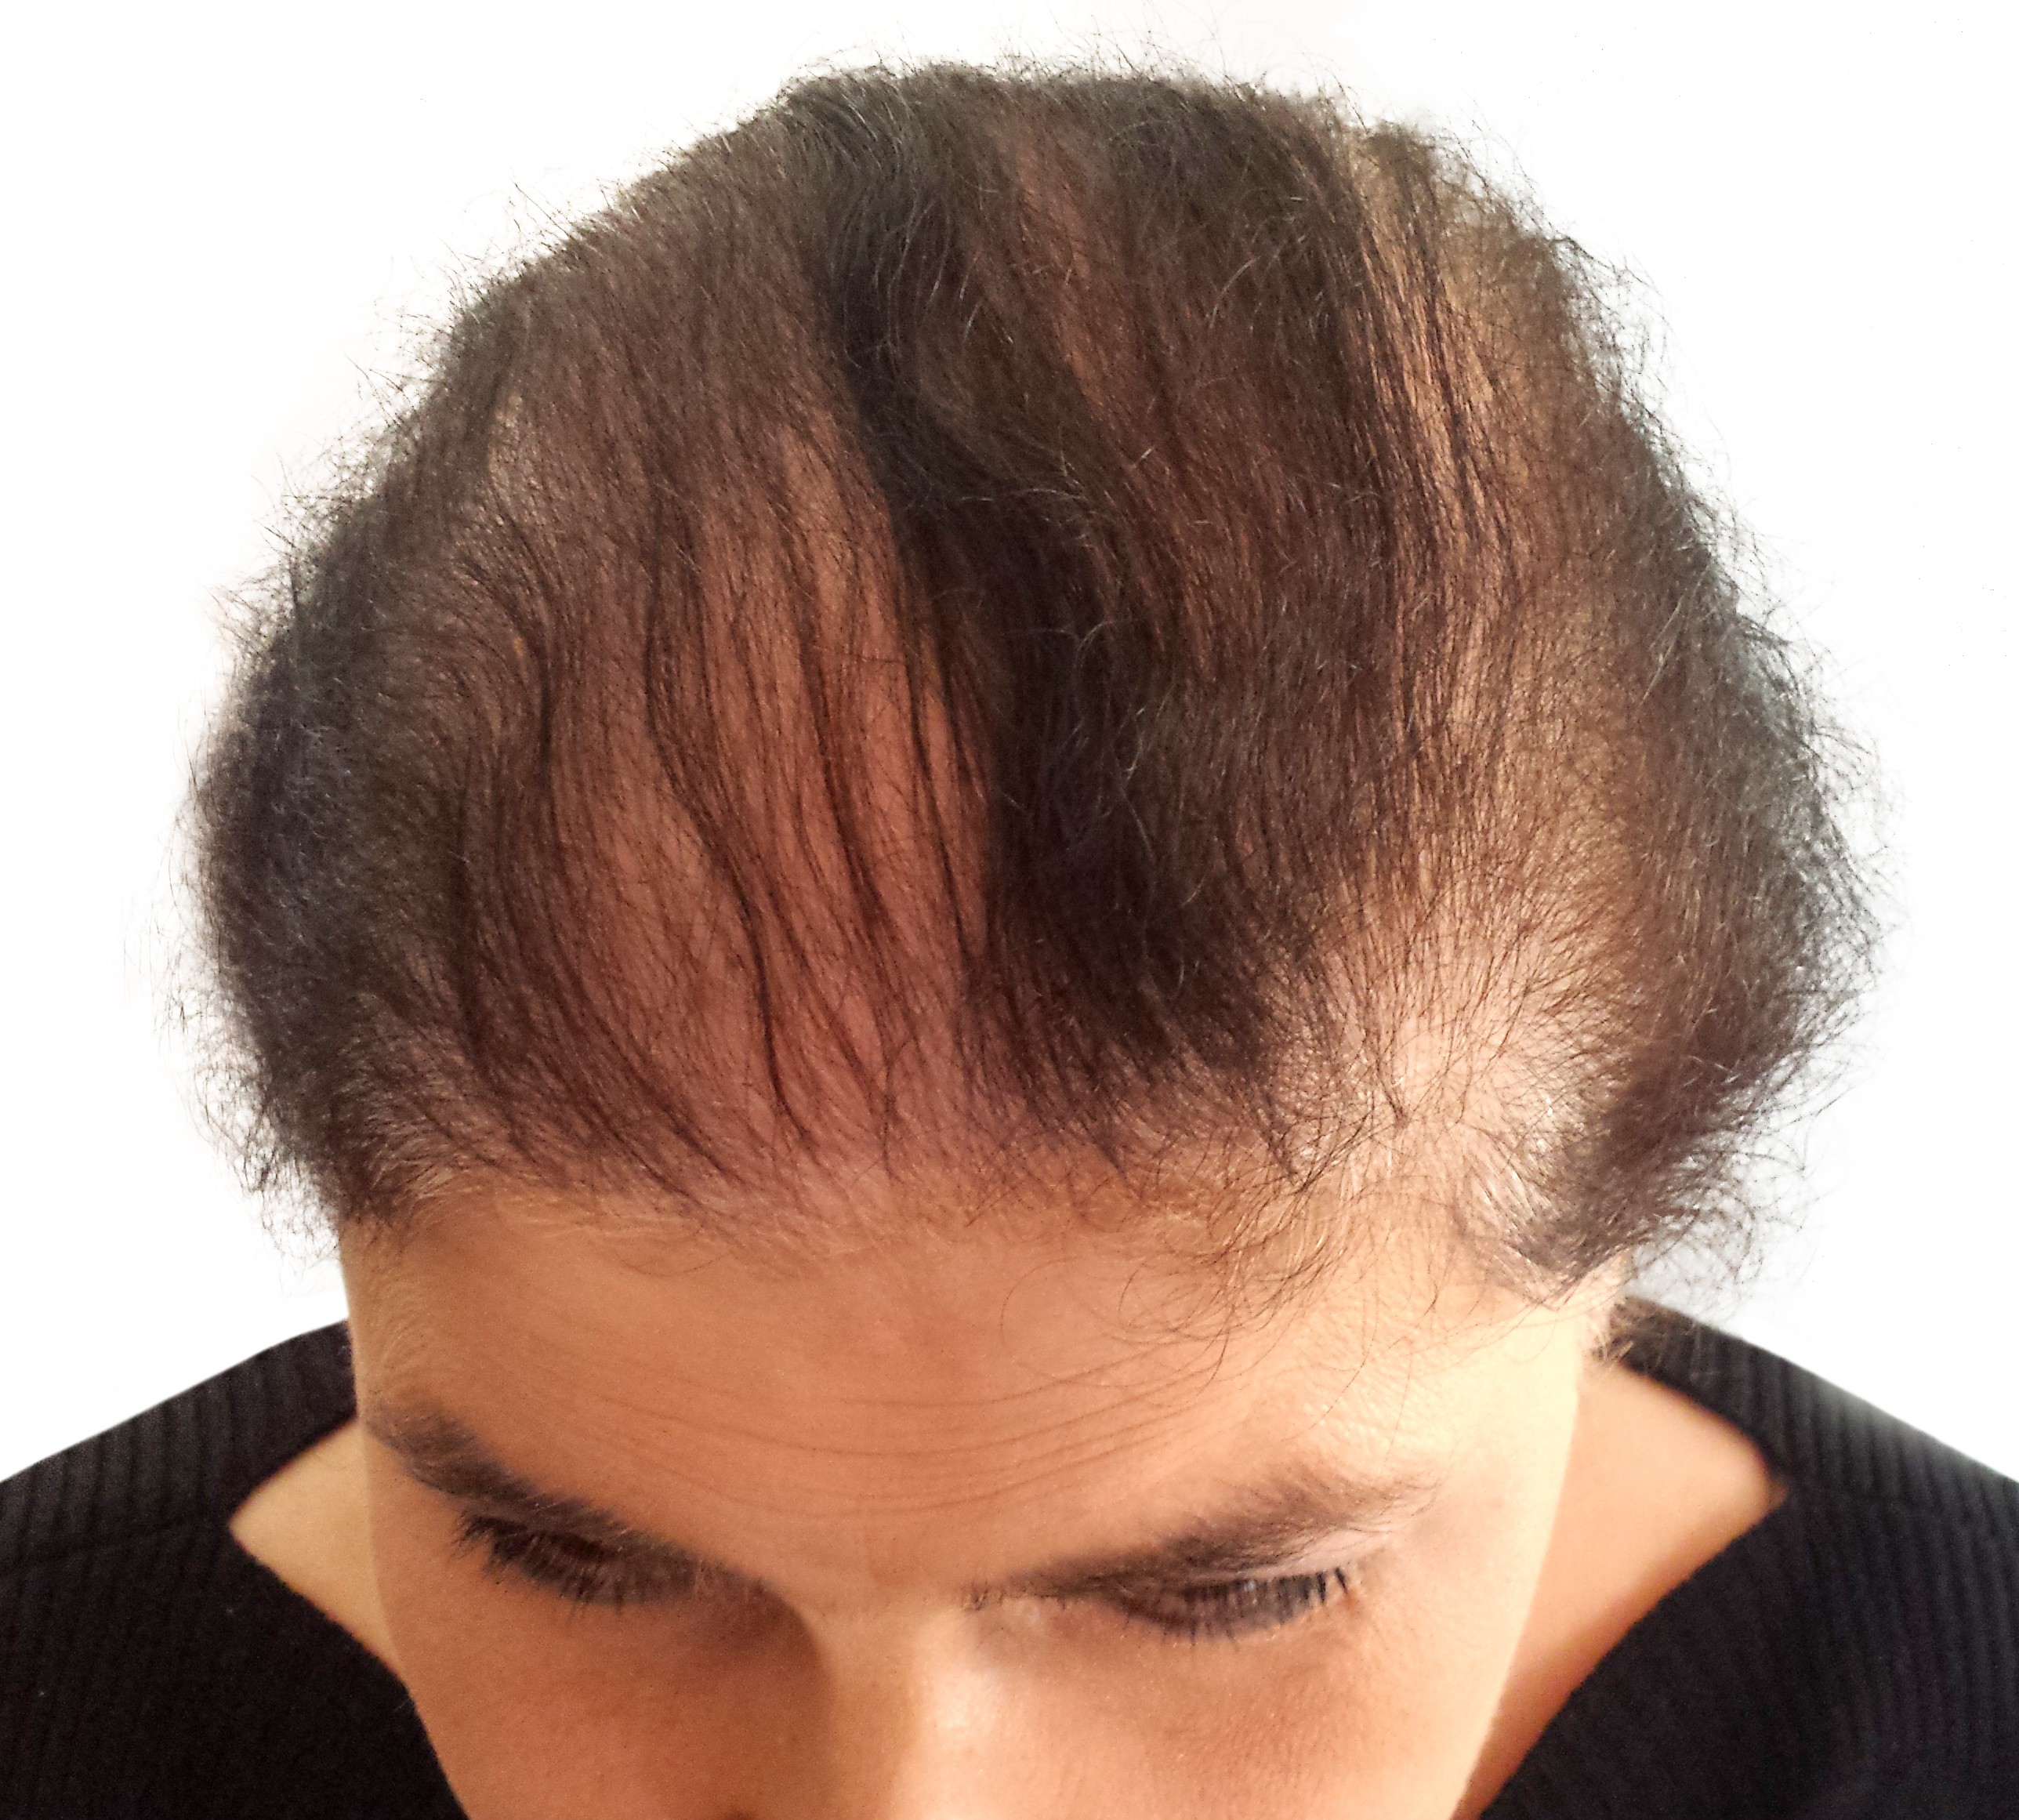 Image showing hair loss in a woman